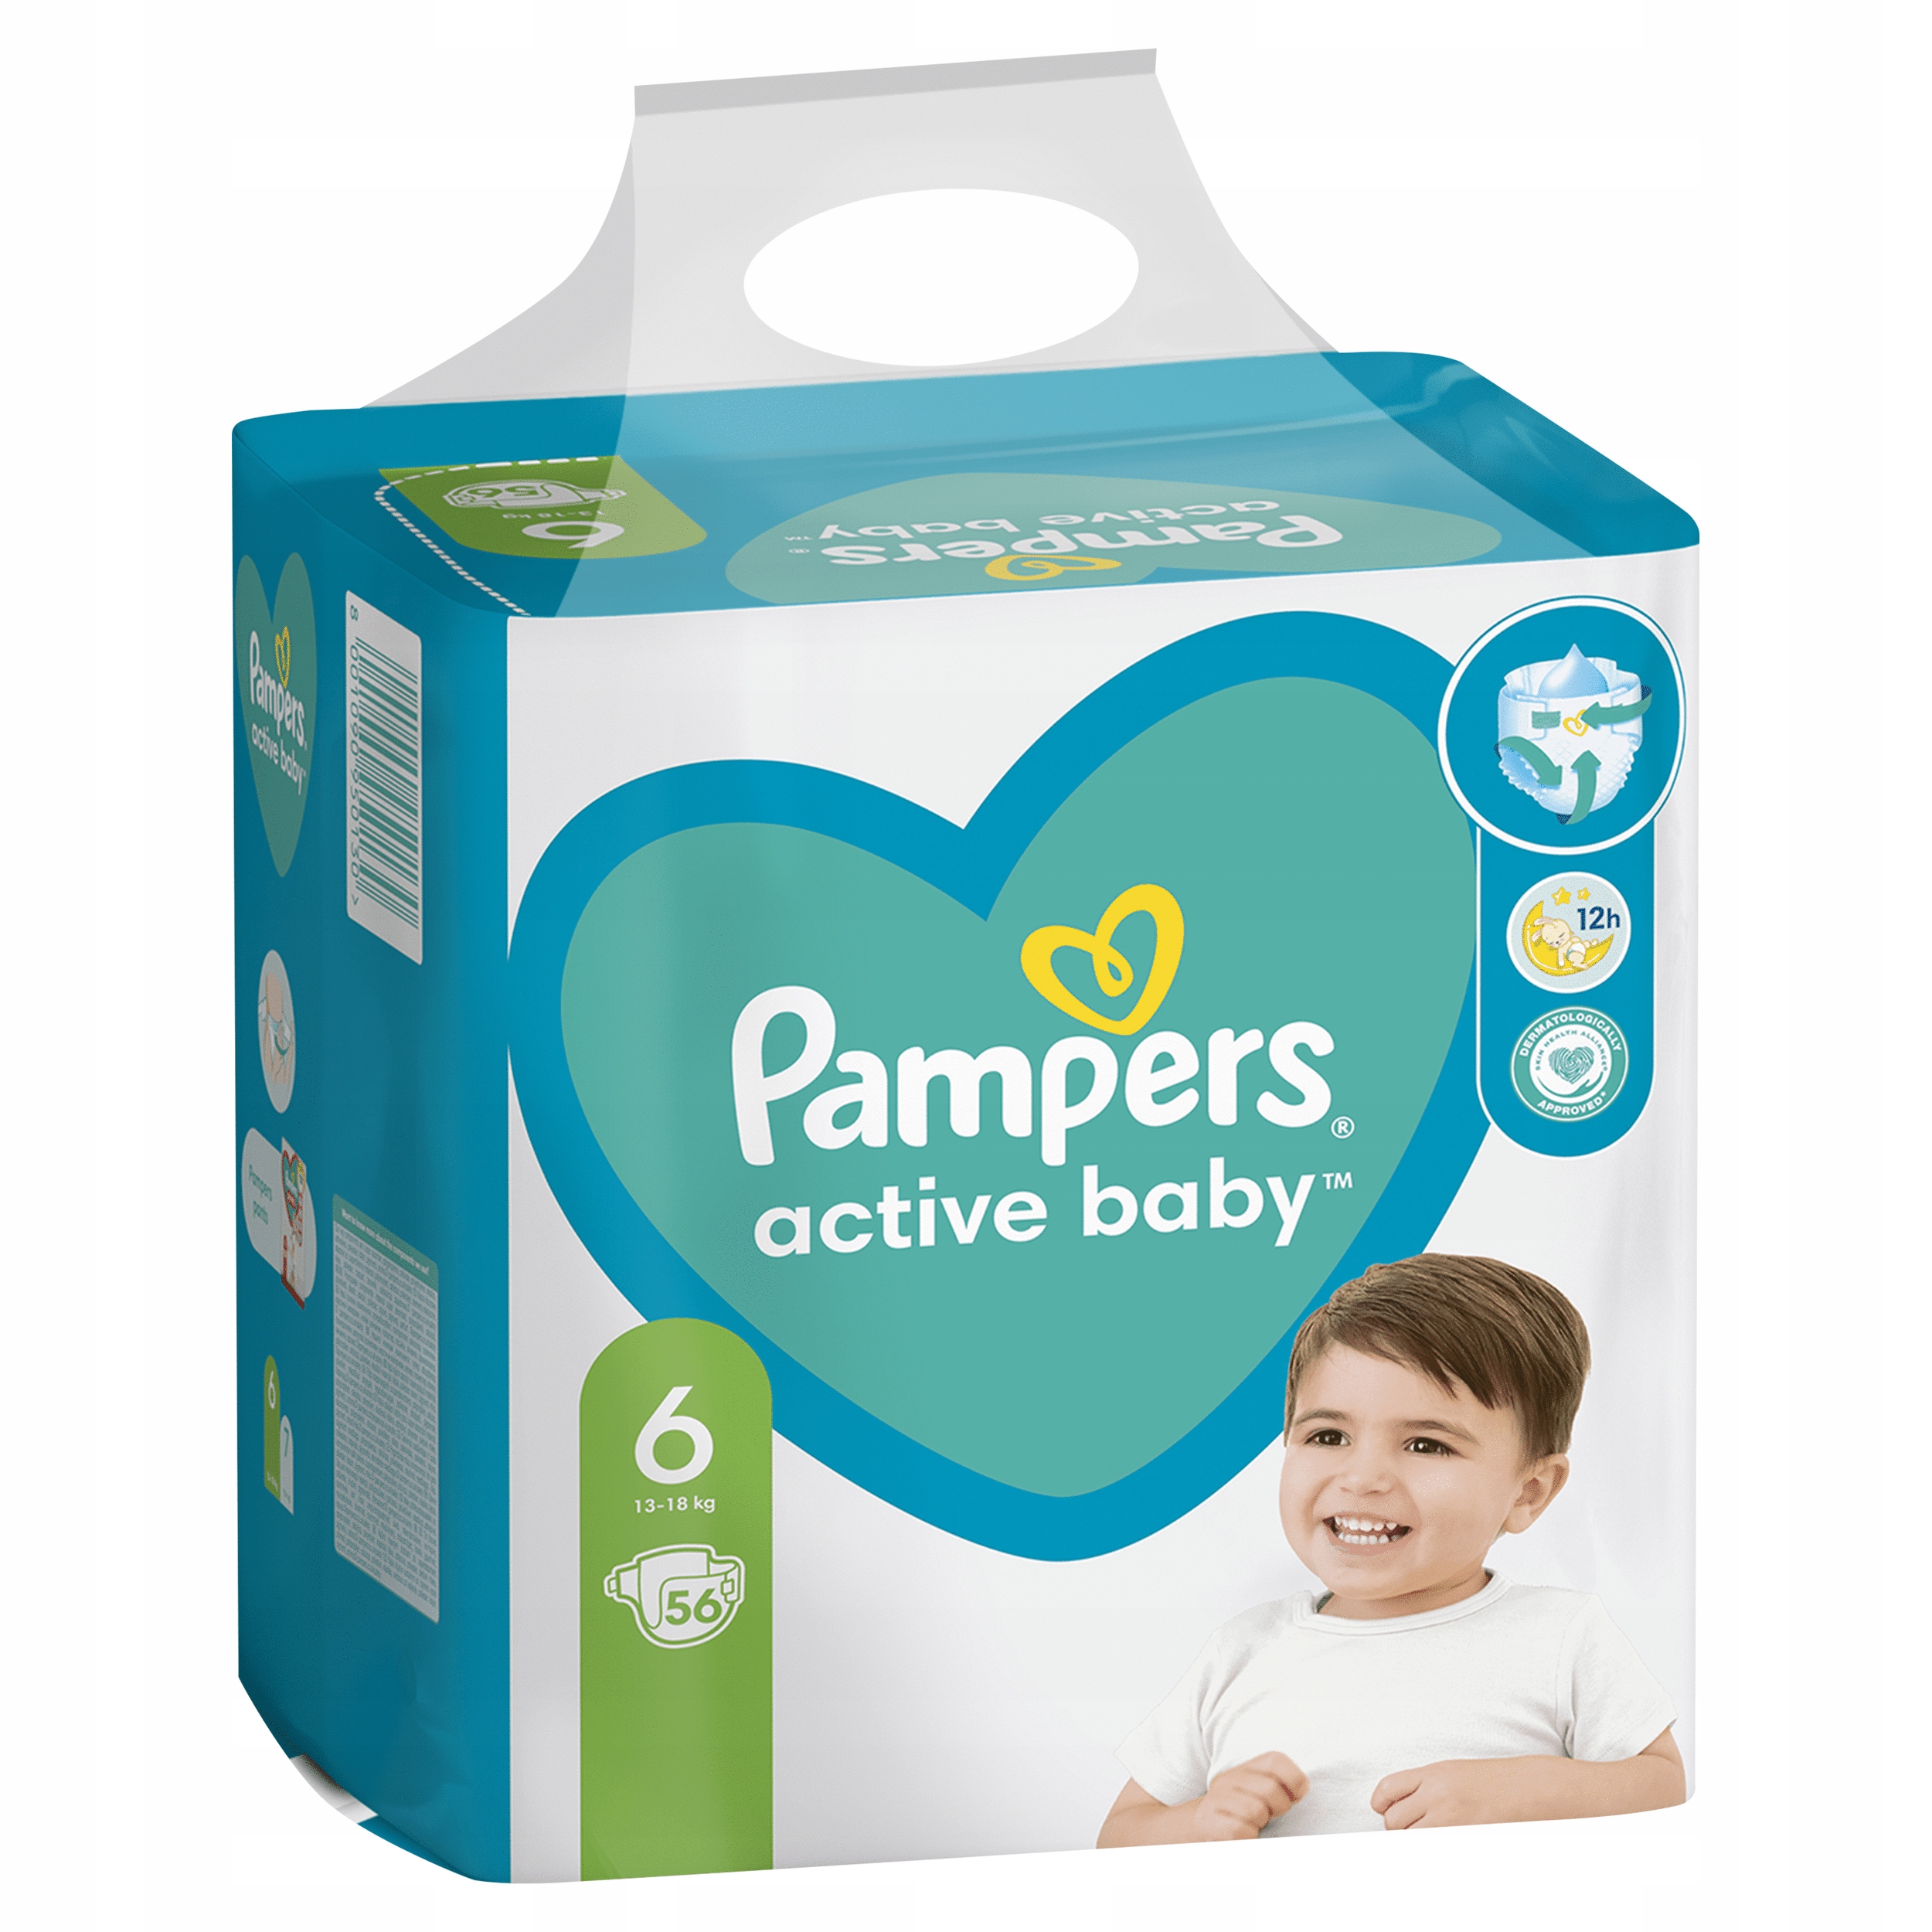 dcp j4110dw pampers